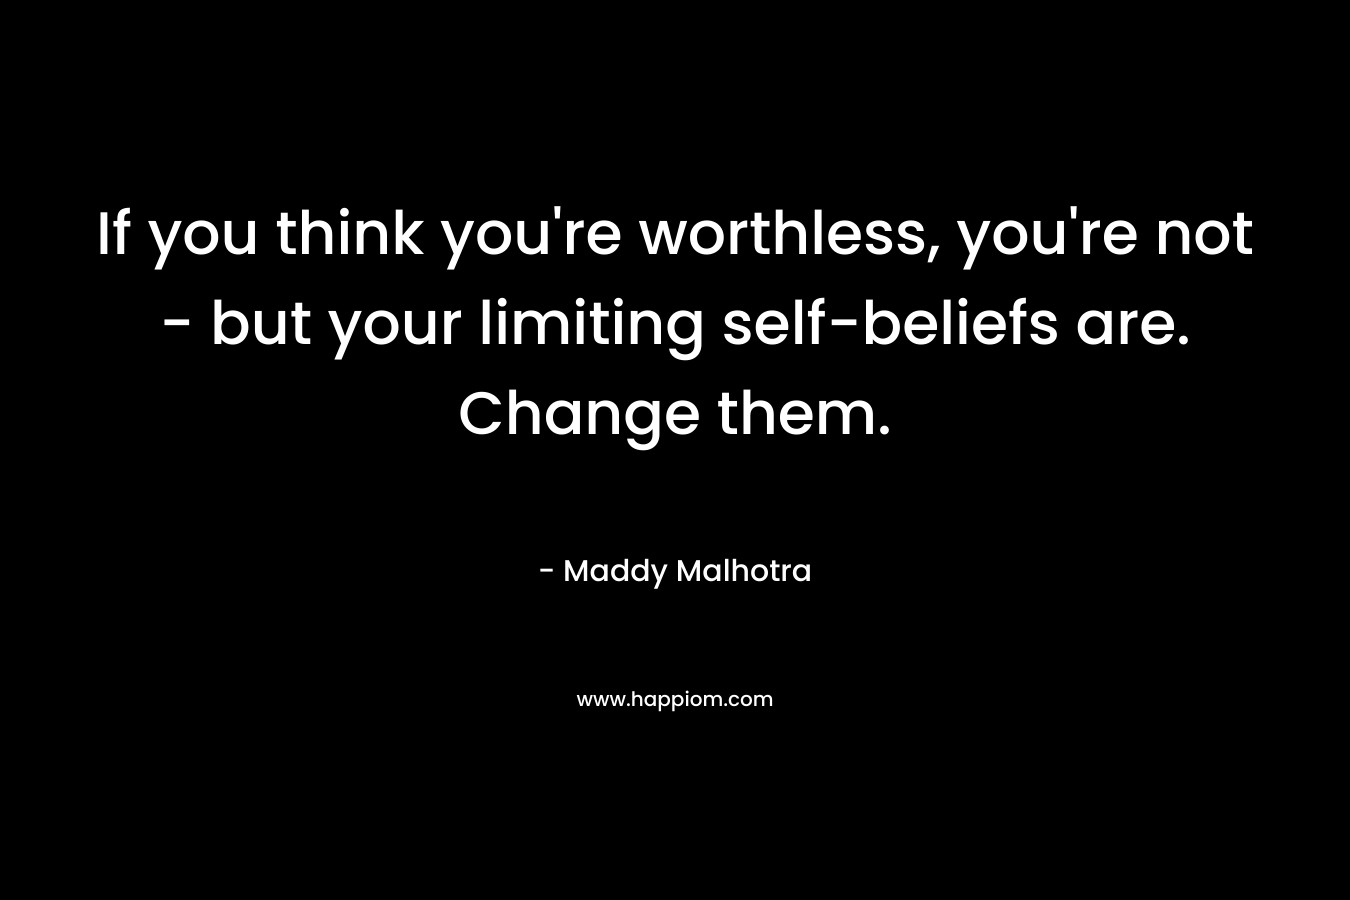 If you think you're worthless, you're not - but your limiting self-beliefs are. Change them.